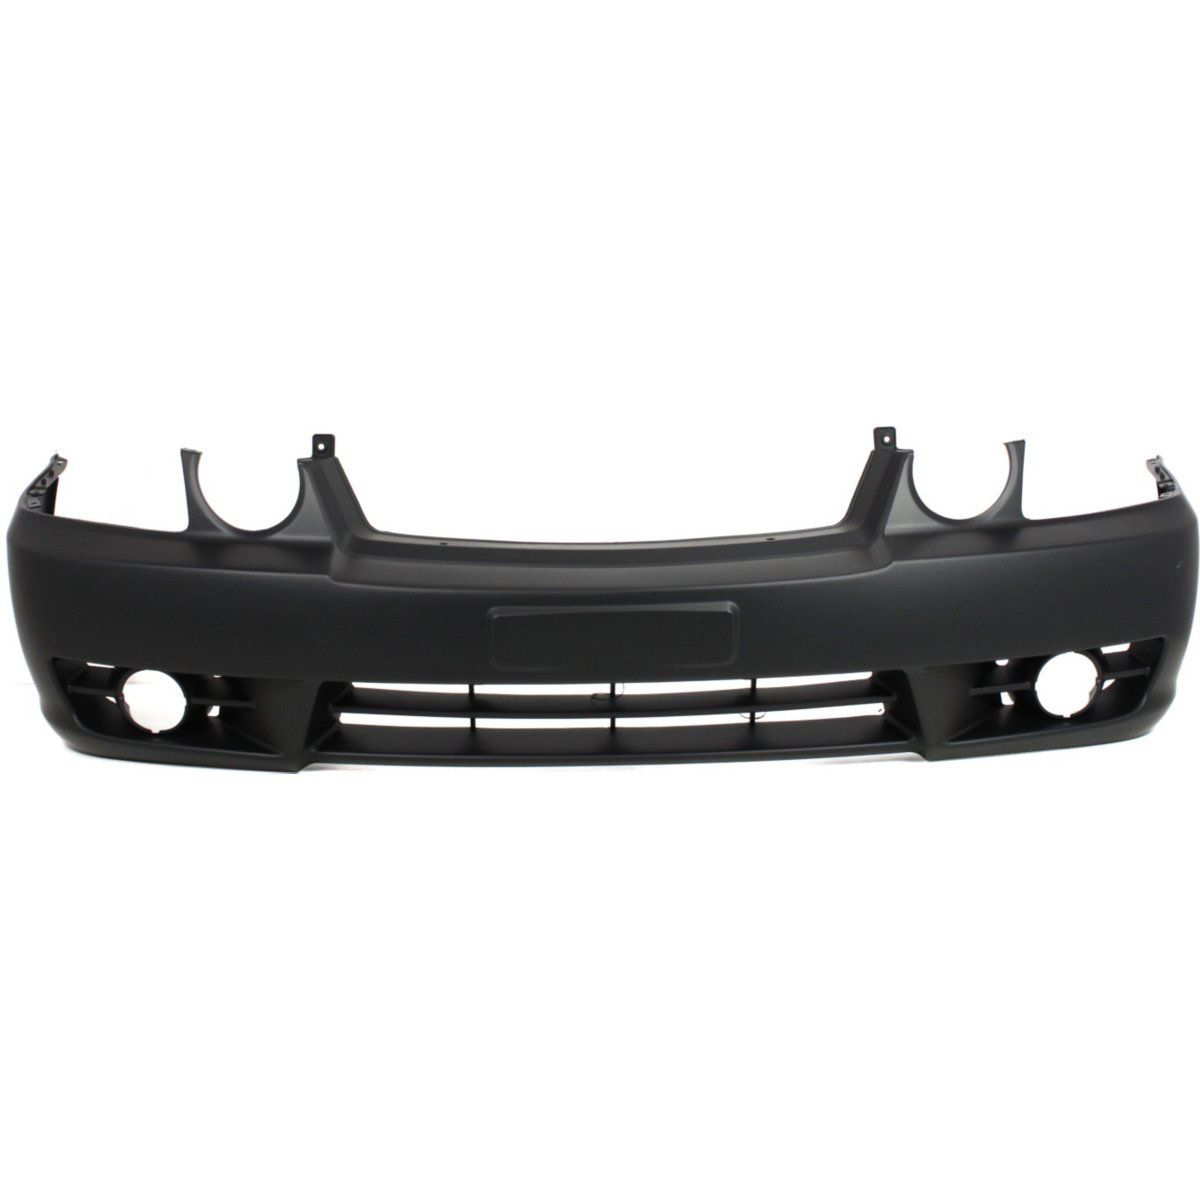 2003-2006 KIA OPTIMA Front Bumper Cover Painted to Match